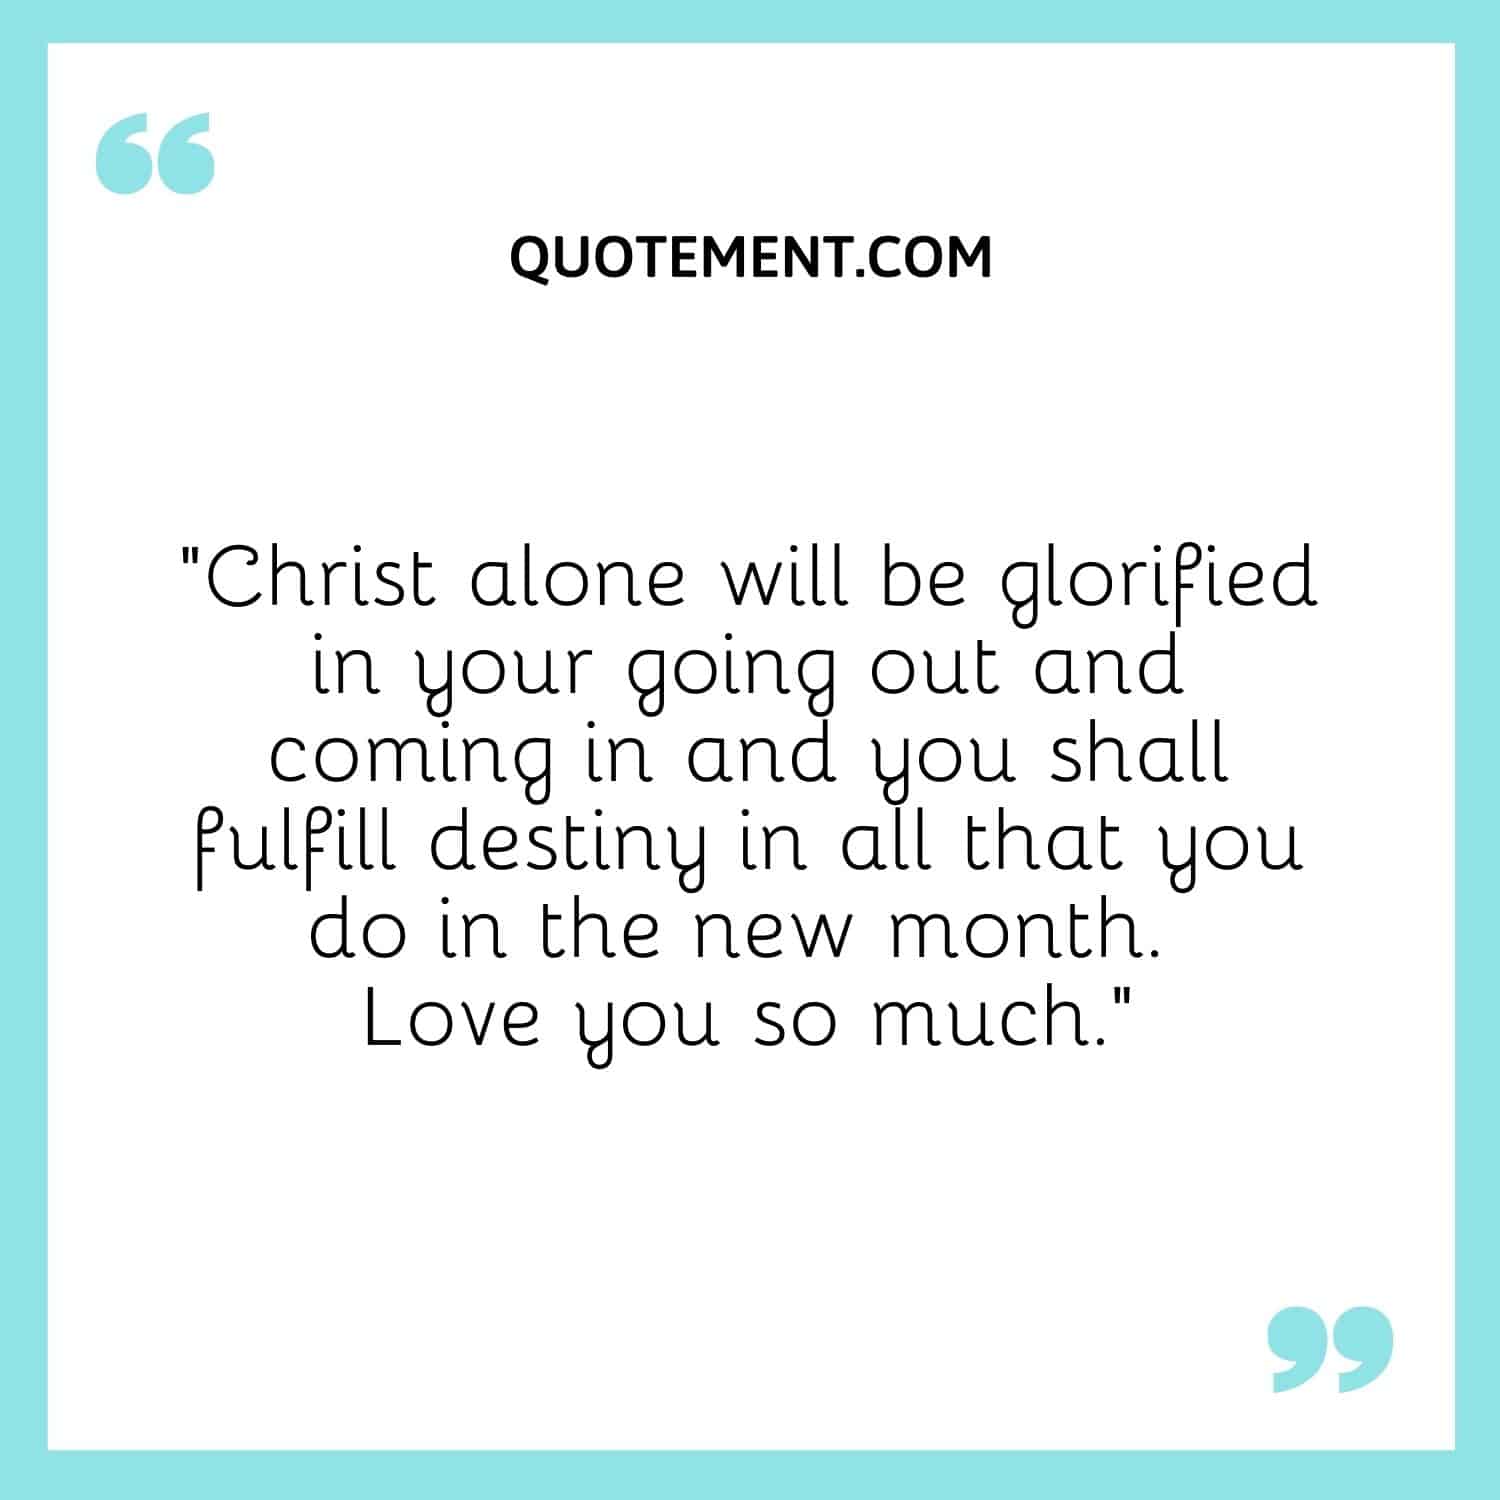 Christ alone will be glorified in your going out